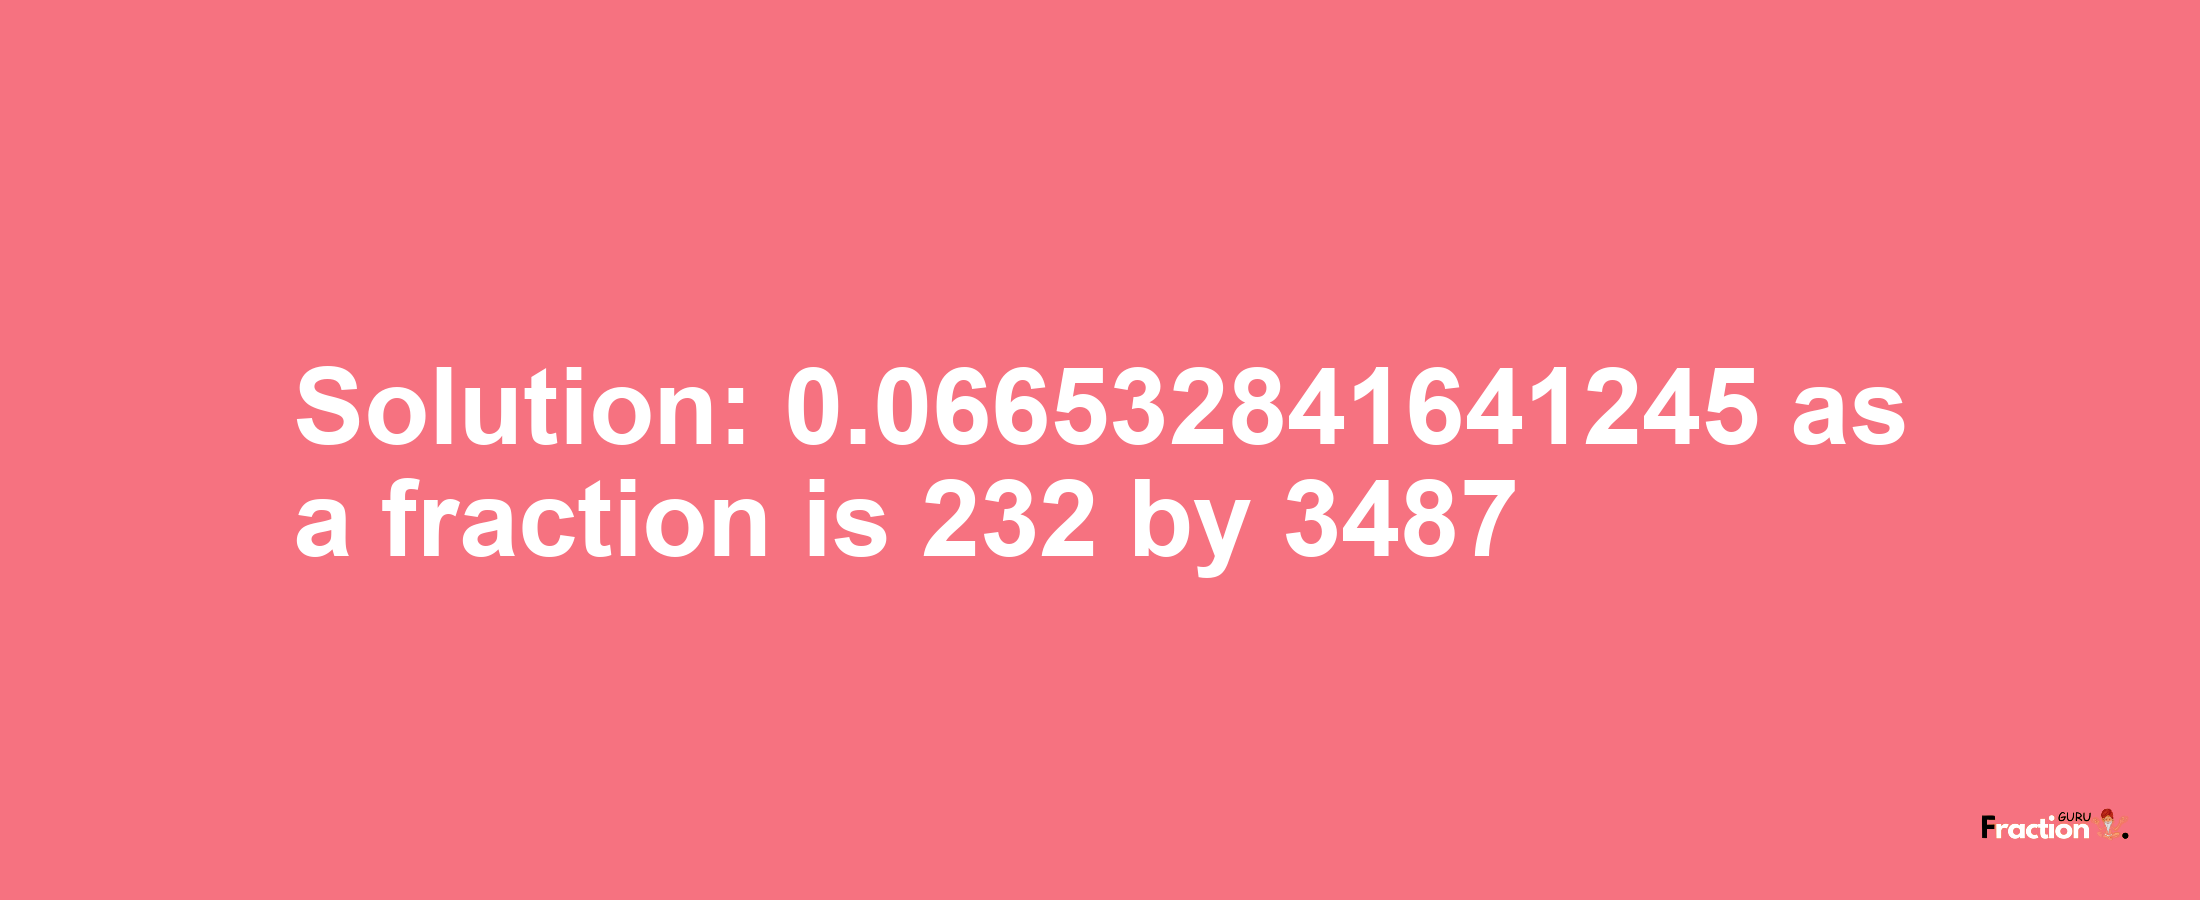 Solution:0.066532841641245 as a fraction is 232/3487